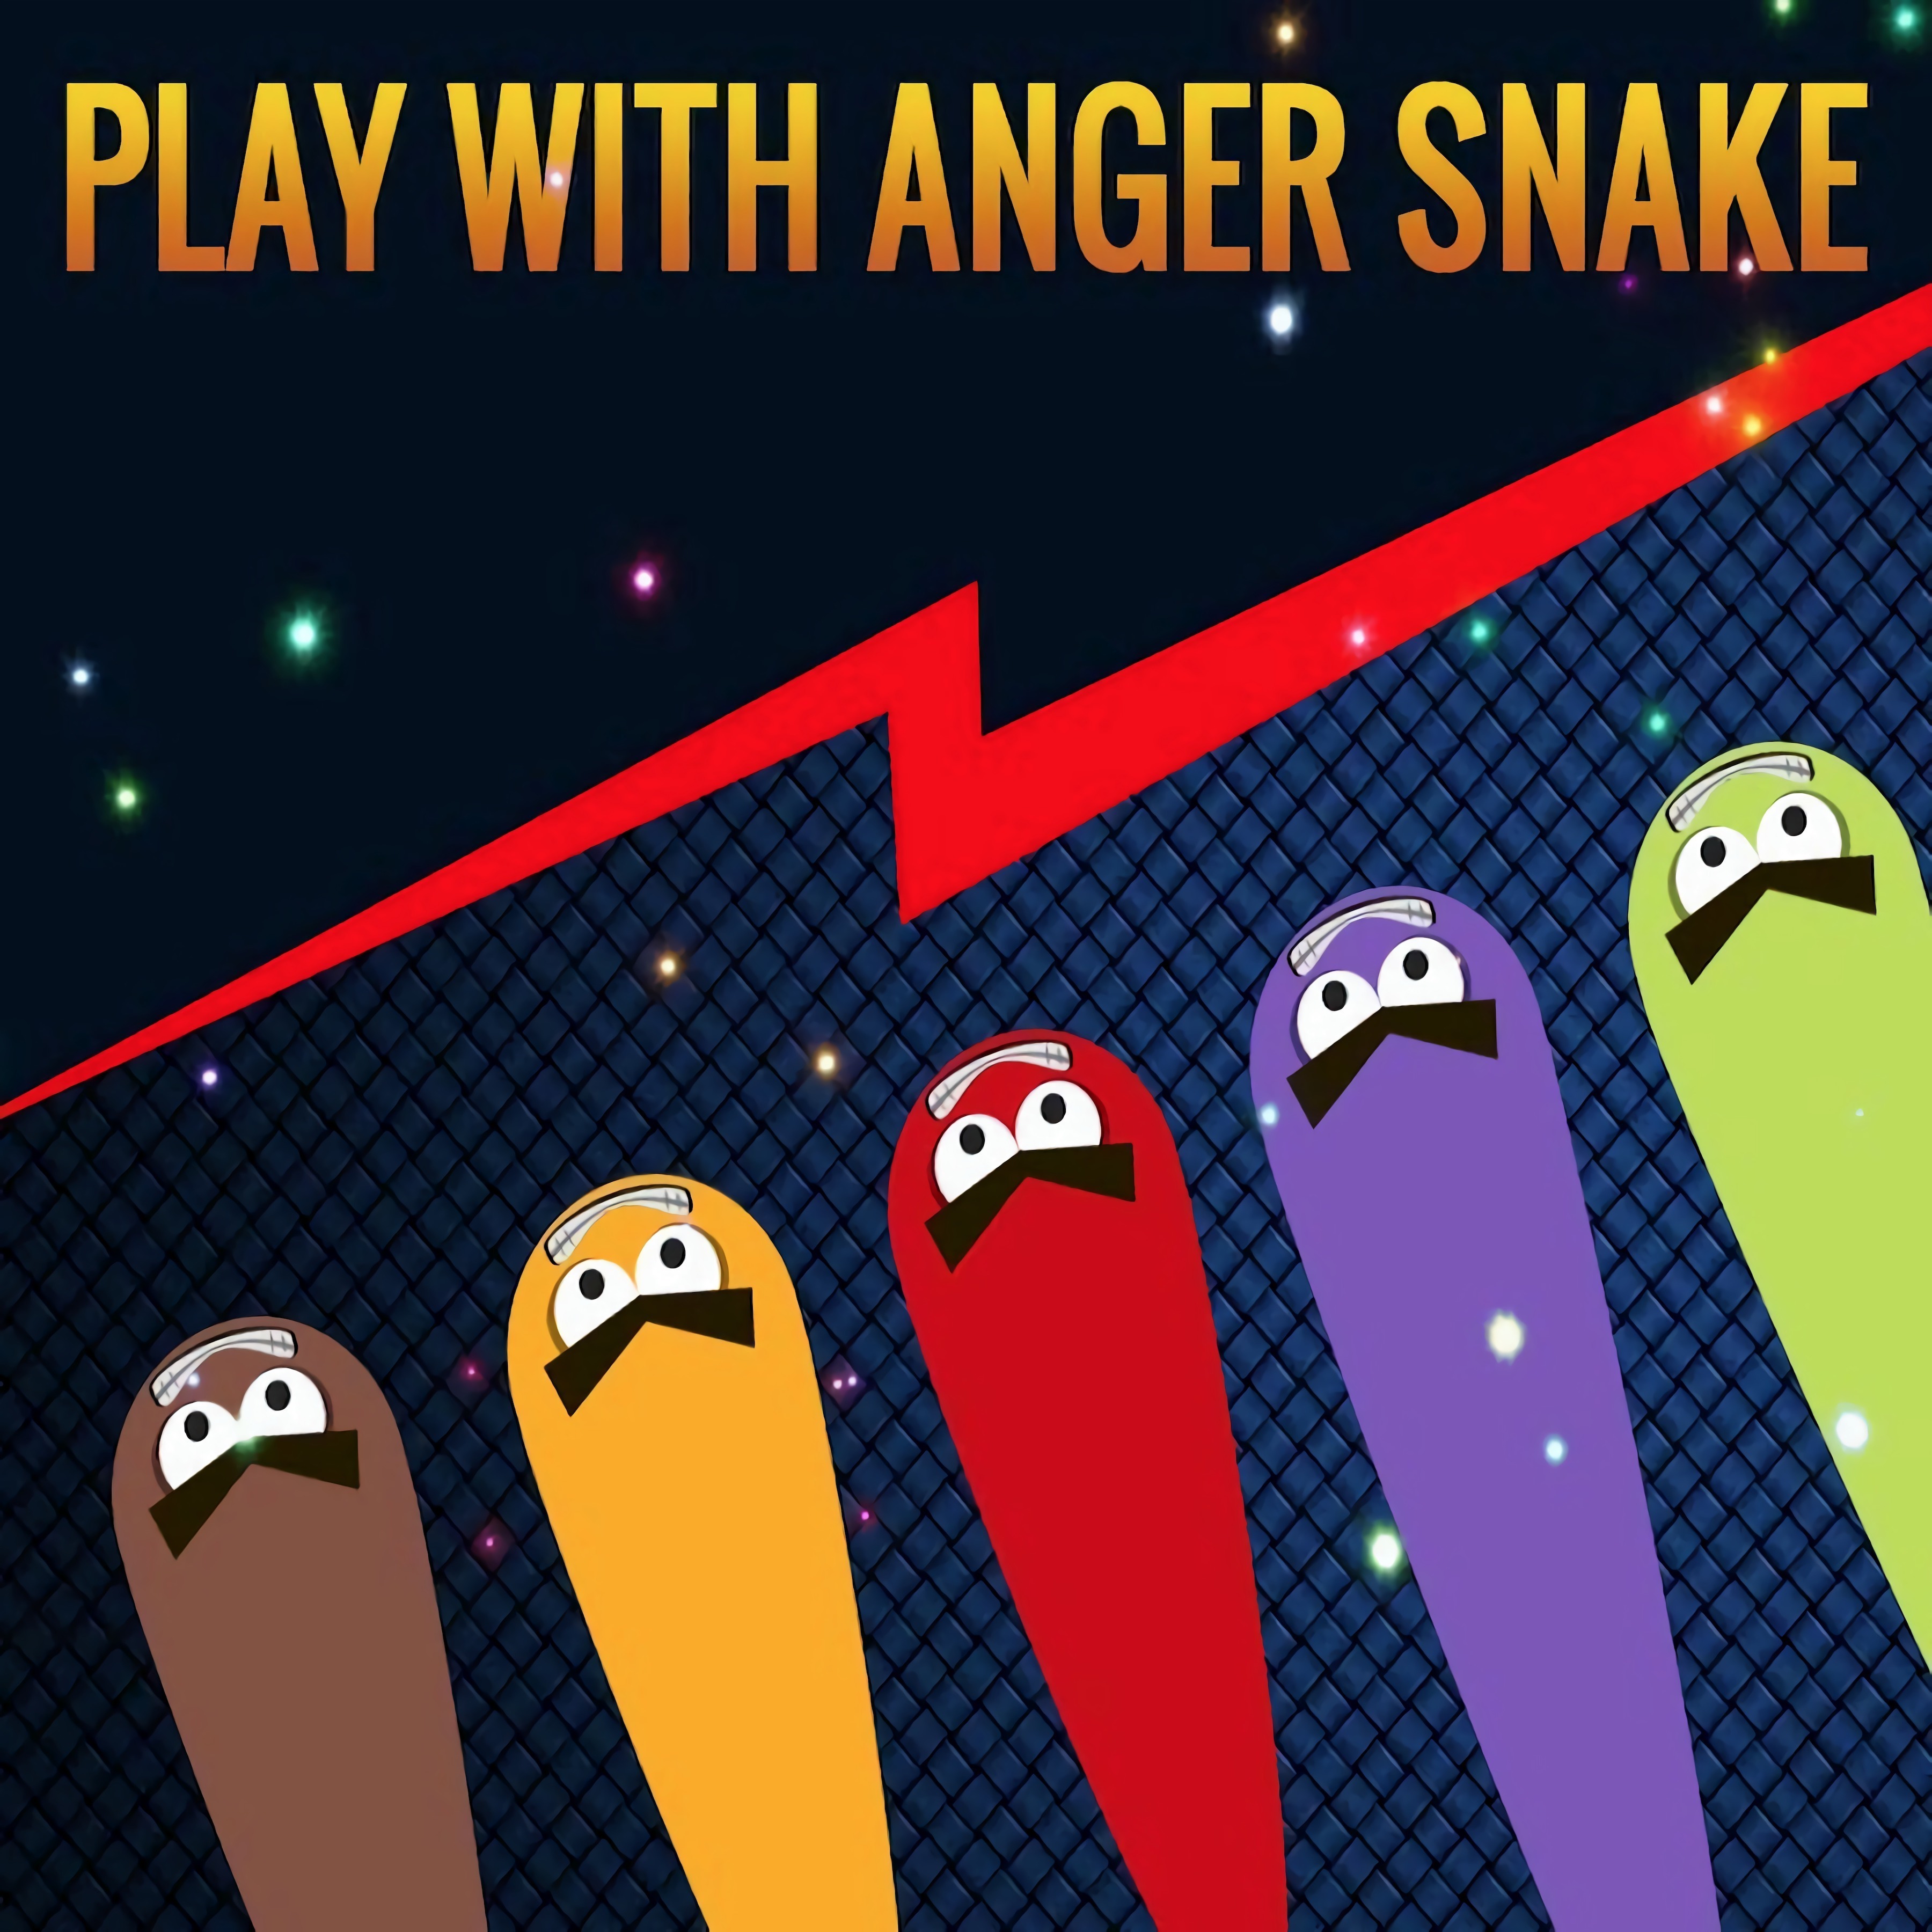 Angry Snakes